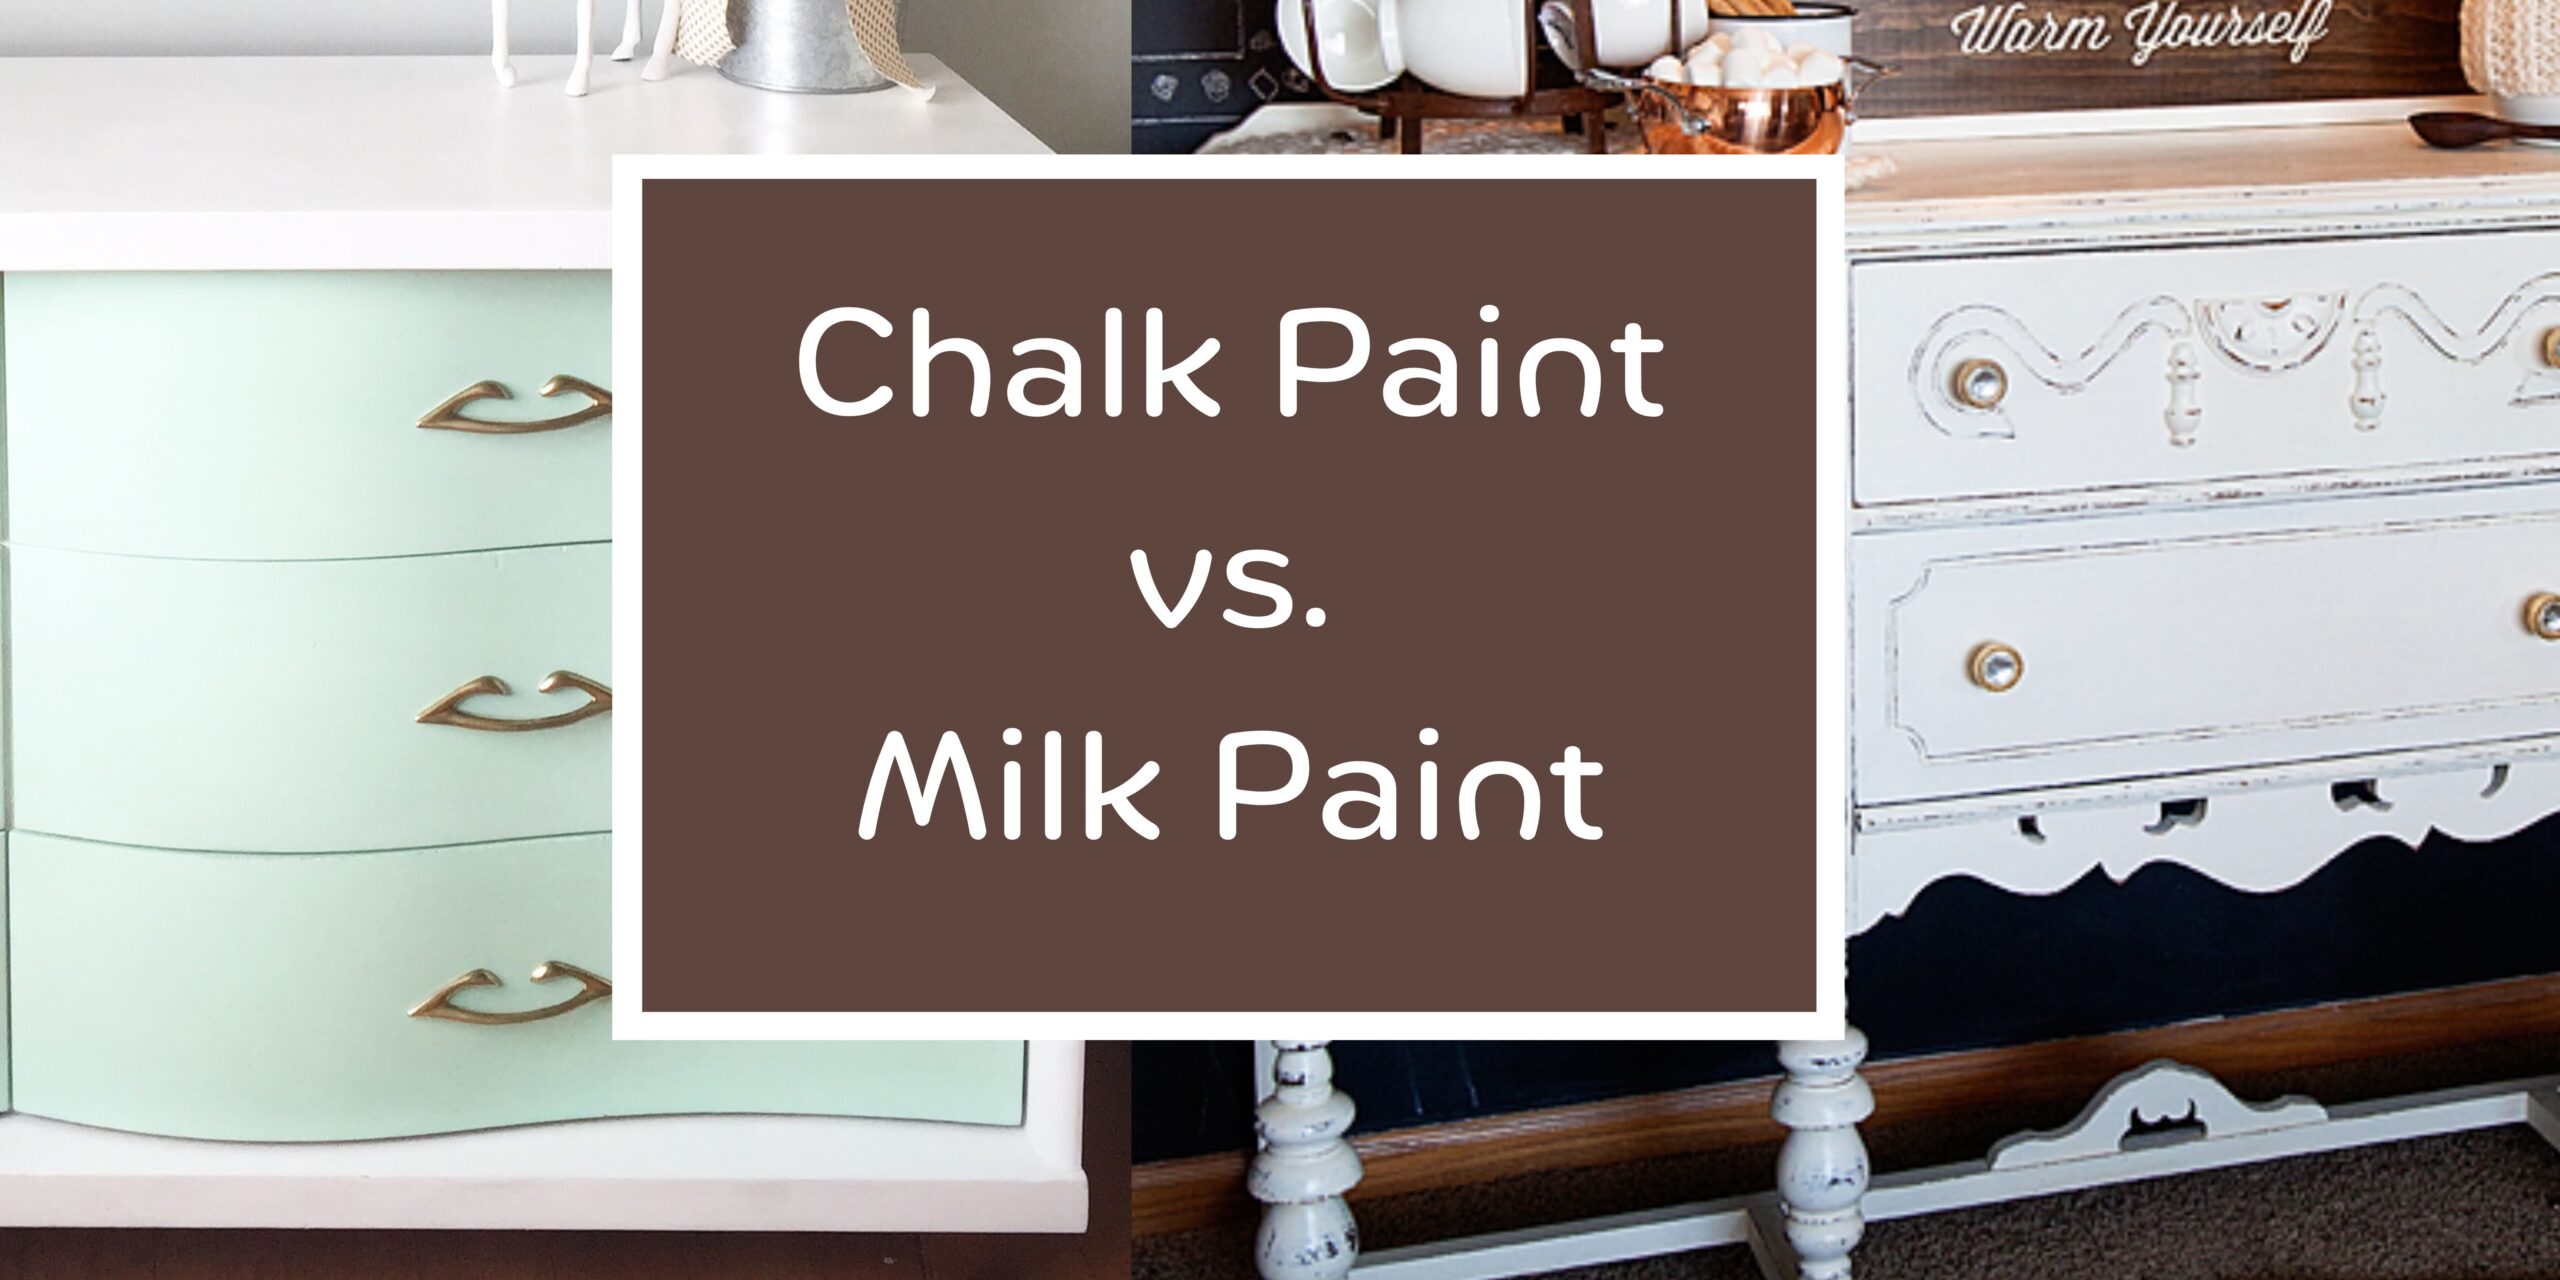 Milk Paint vs Chalk Paint - What's the Difference?